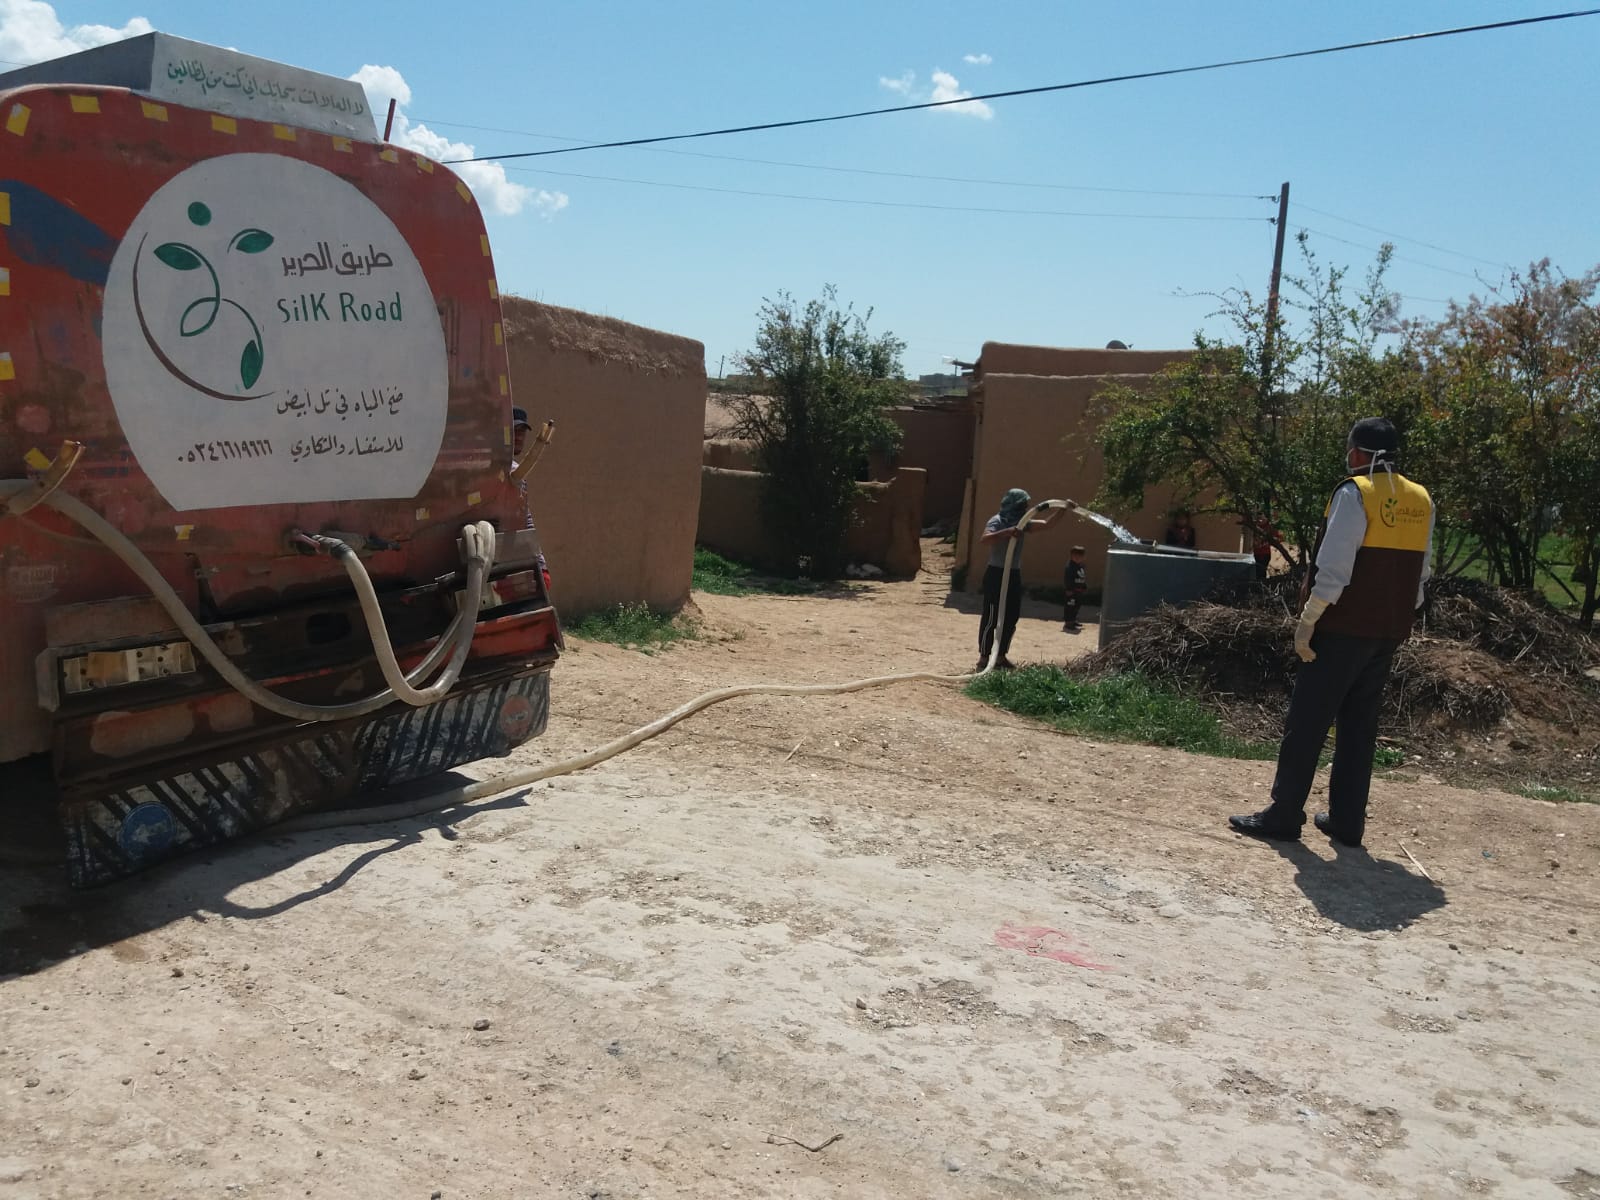 Our team continues to work to the best of its capabilities to deliver clean, sterile water to our people in the Tall abiad area.